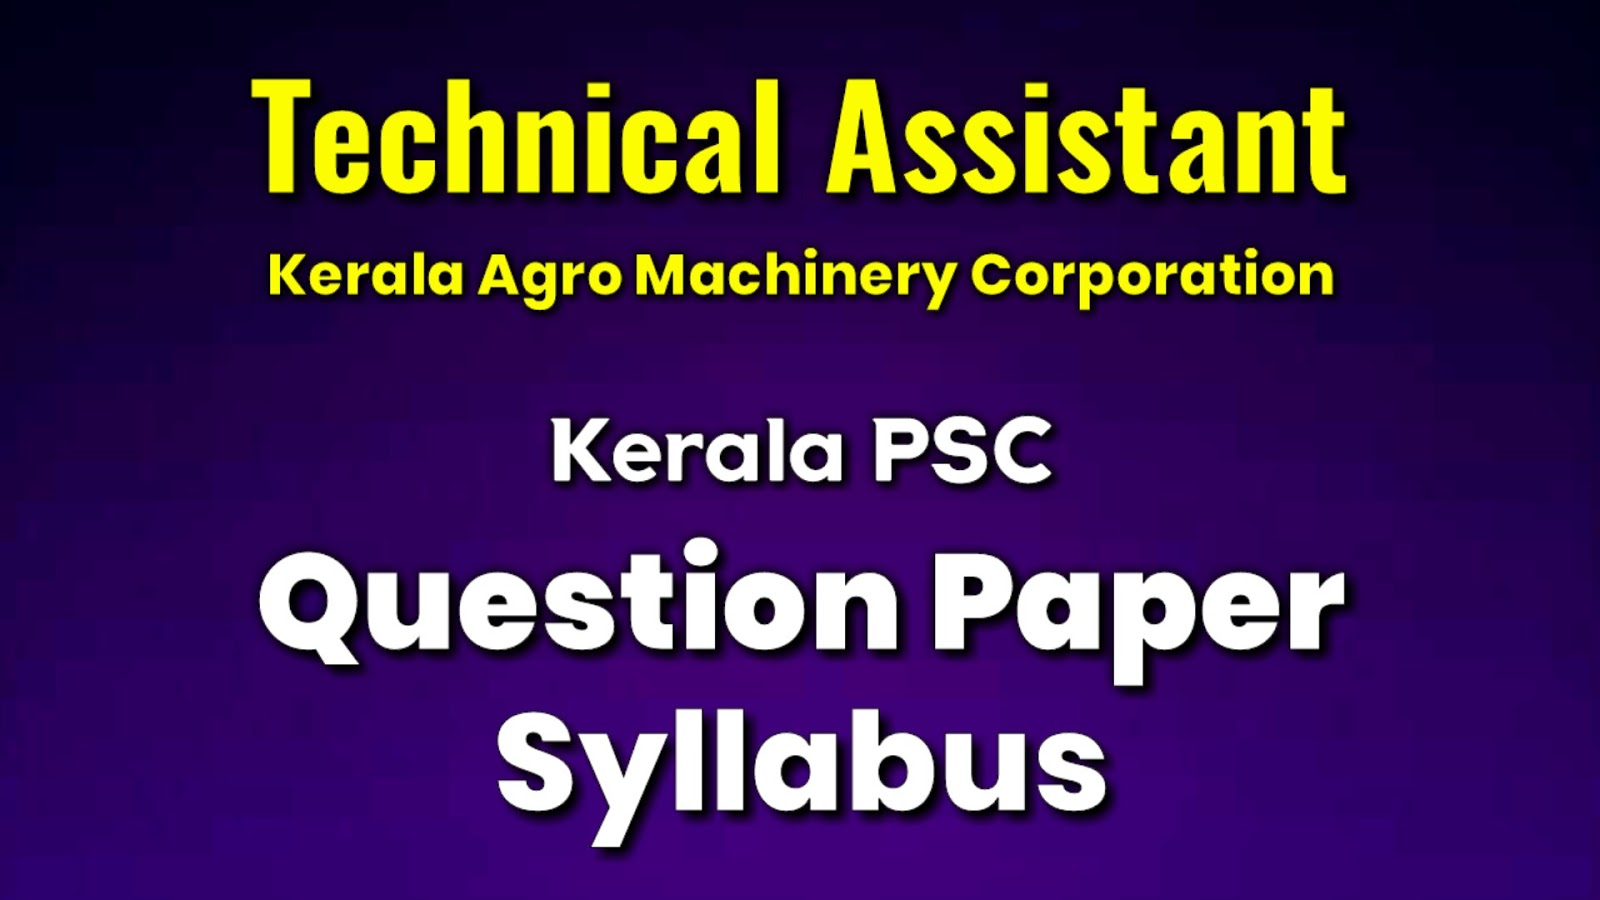 kerala-psc-technical-assistant-kerala-agro-machinery-corporation-exam-previous-question